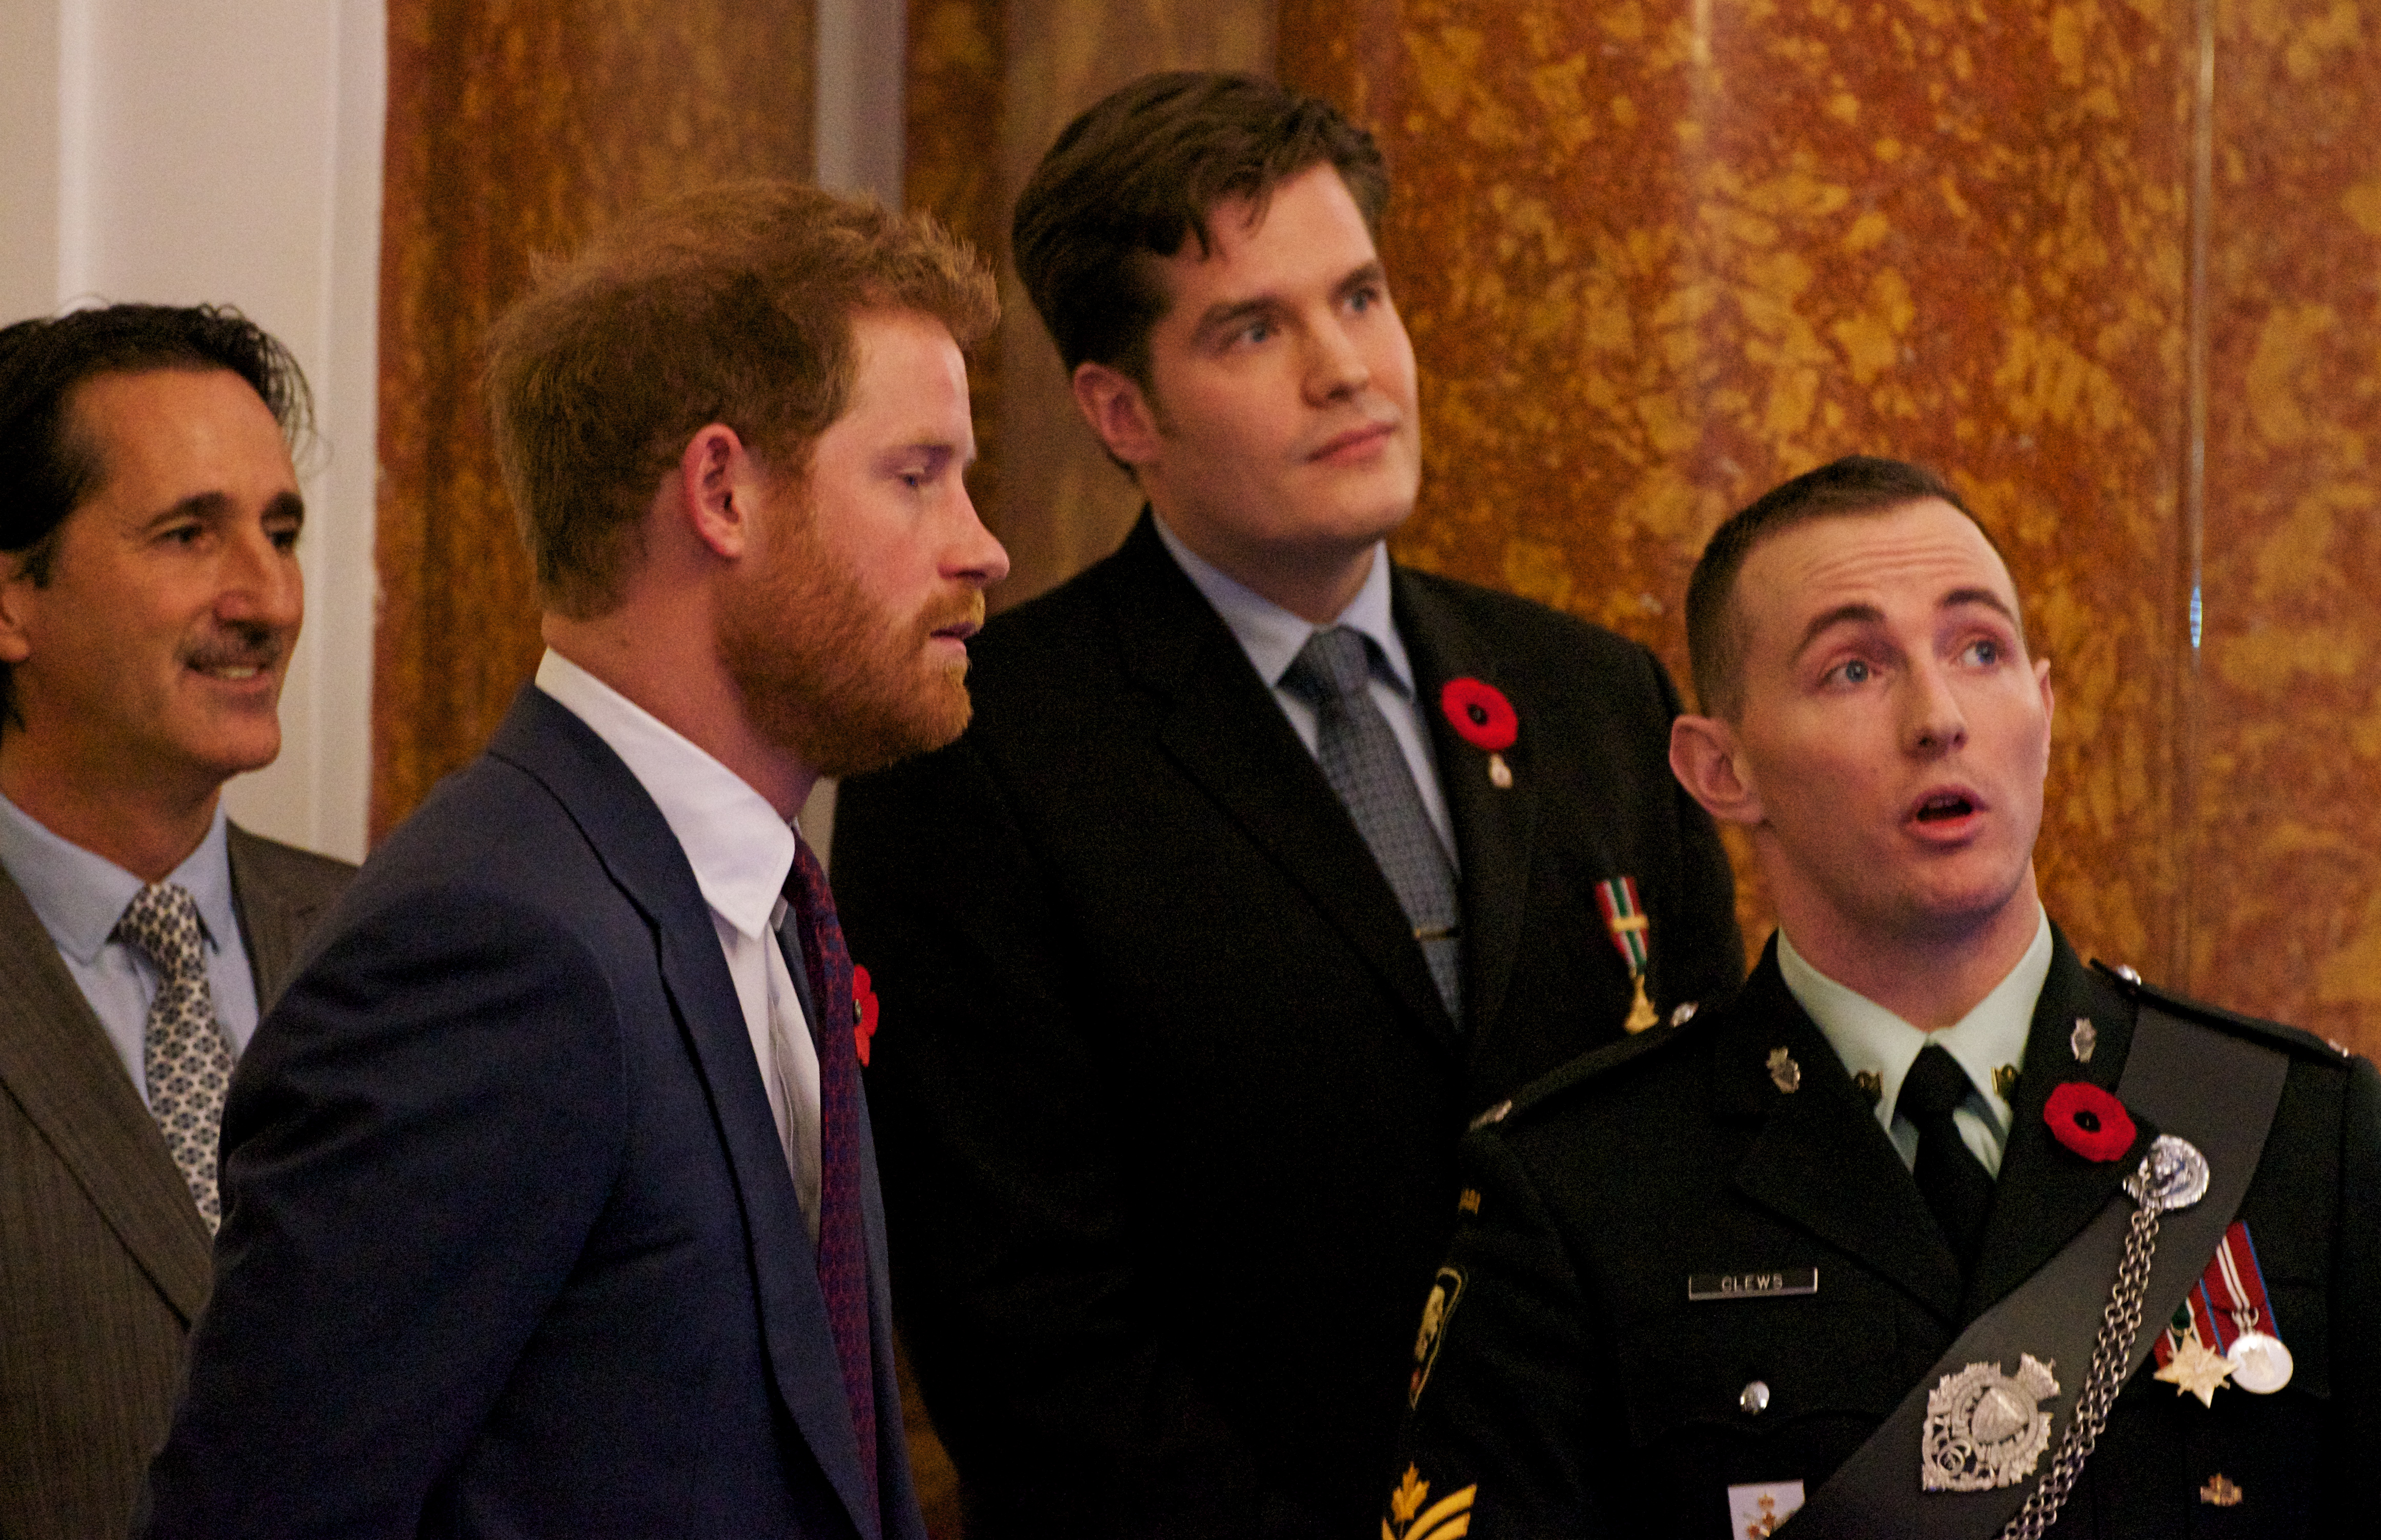 Discussion with Prince Harry regarding lestweforgetCANADA mural